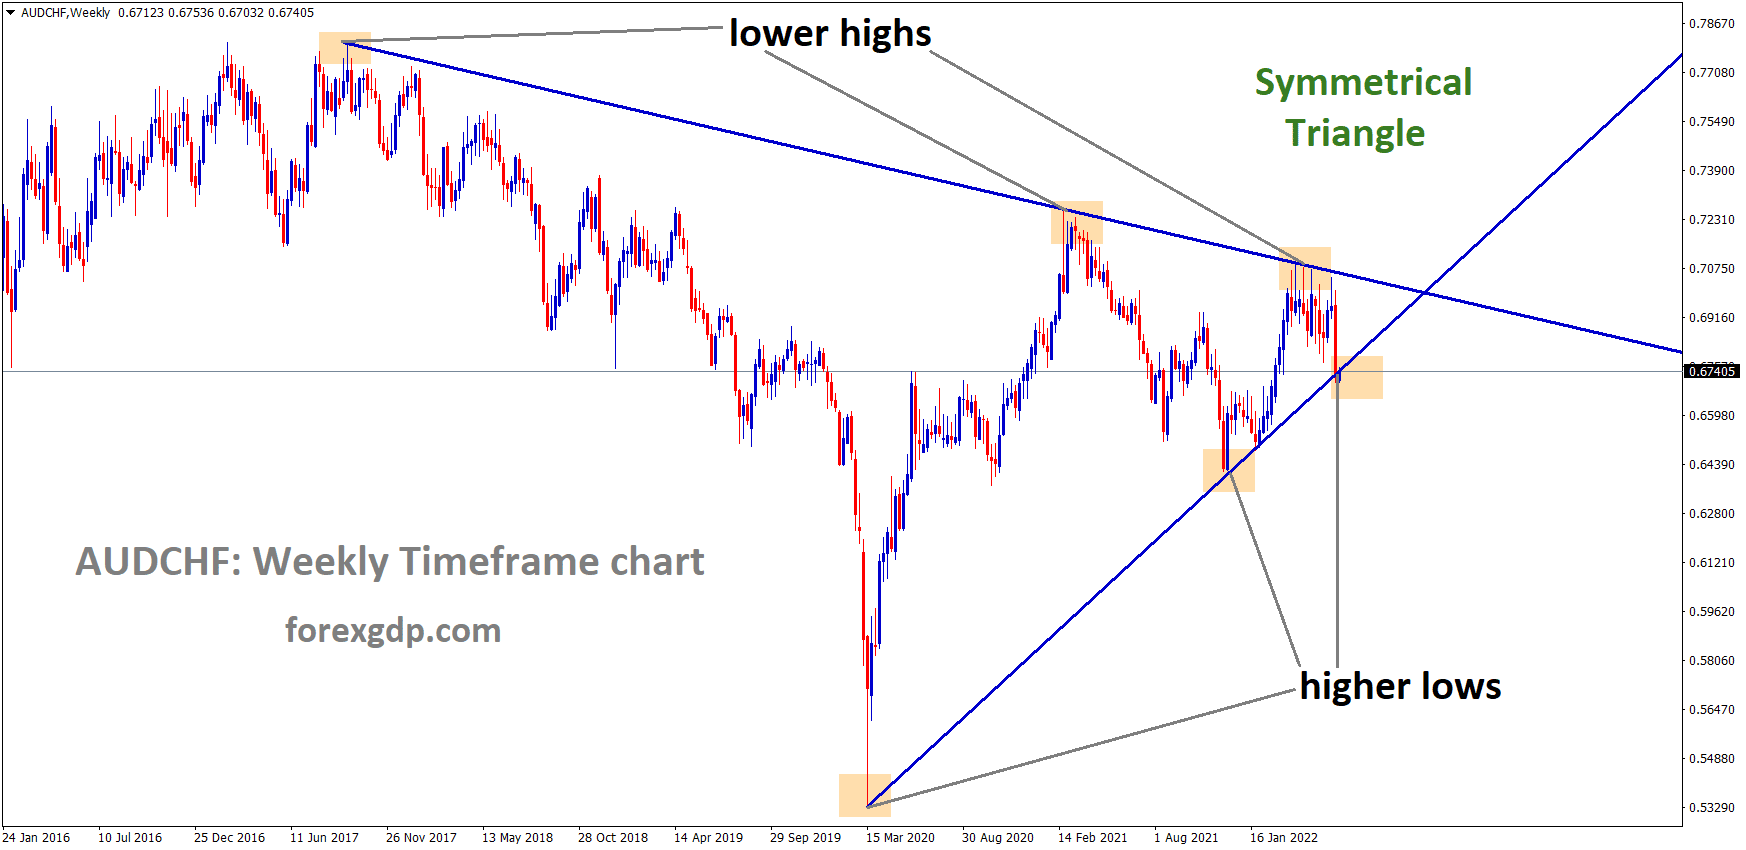 AUDCHF is moving in the Symmetrical triangle pattern and the Market has rebounded from the bottom area of the pattern